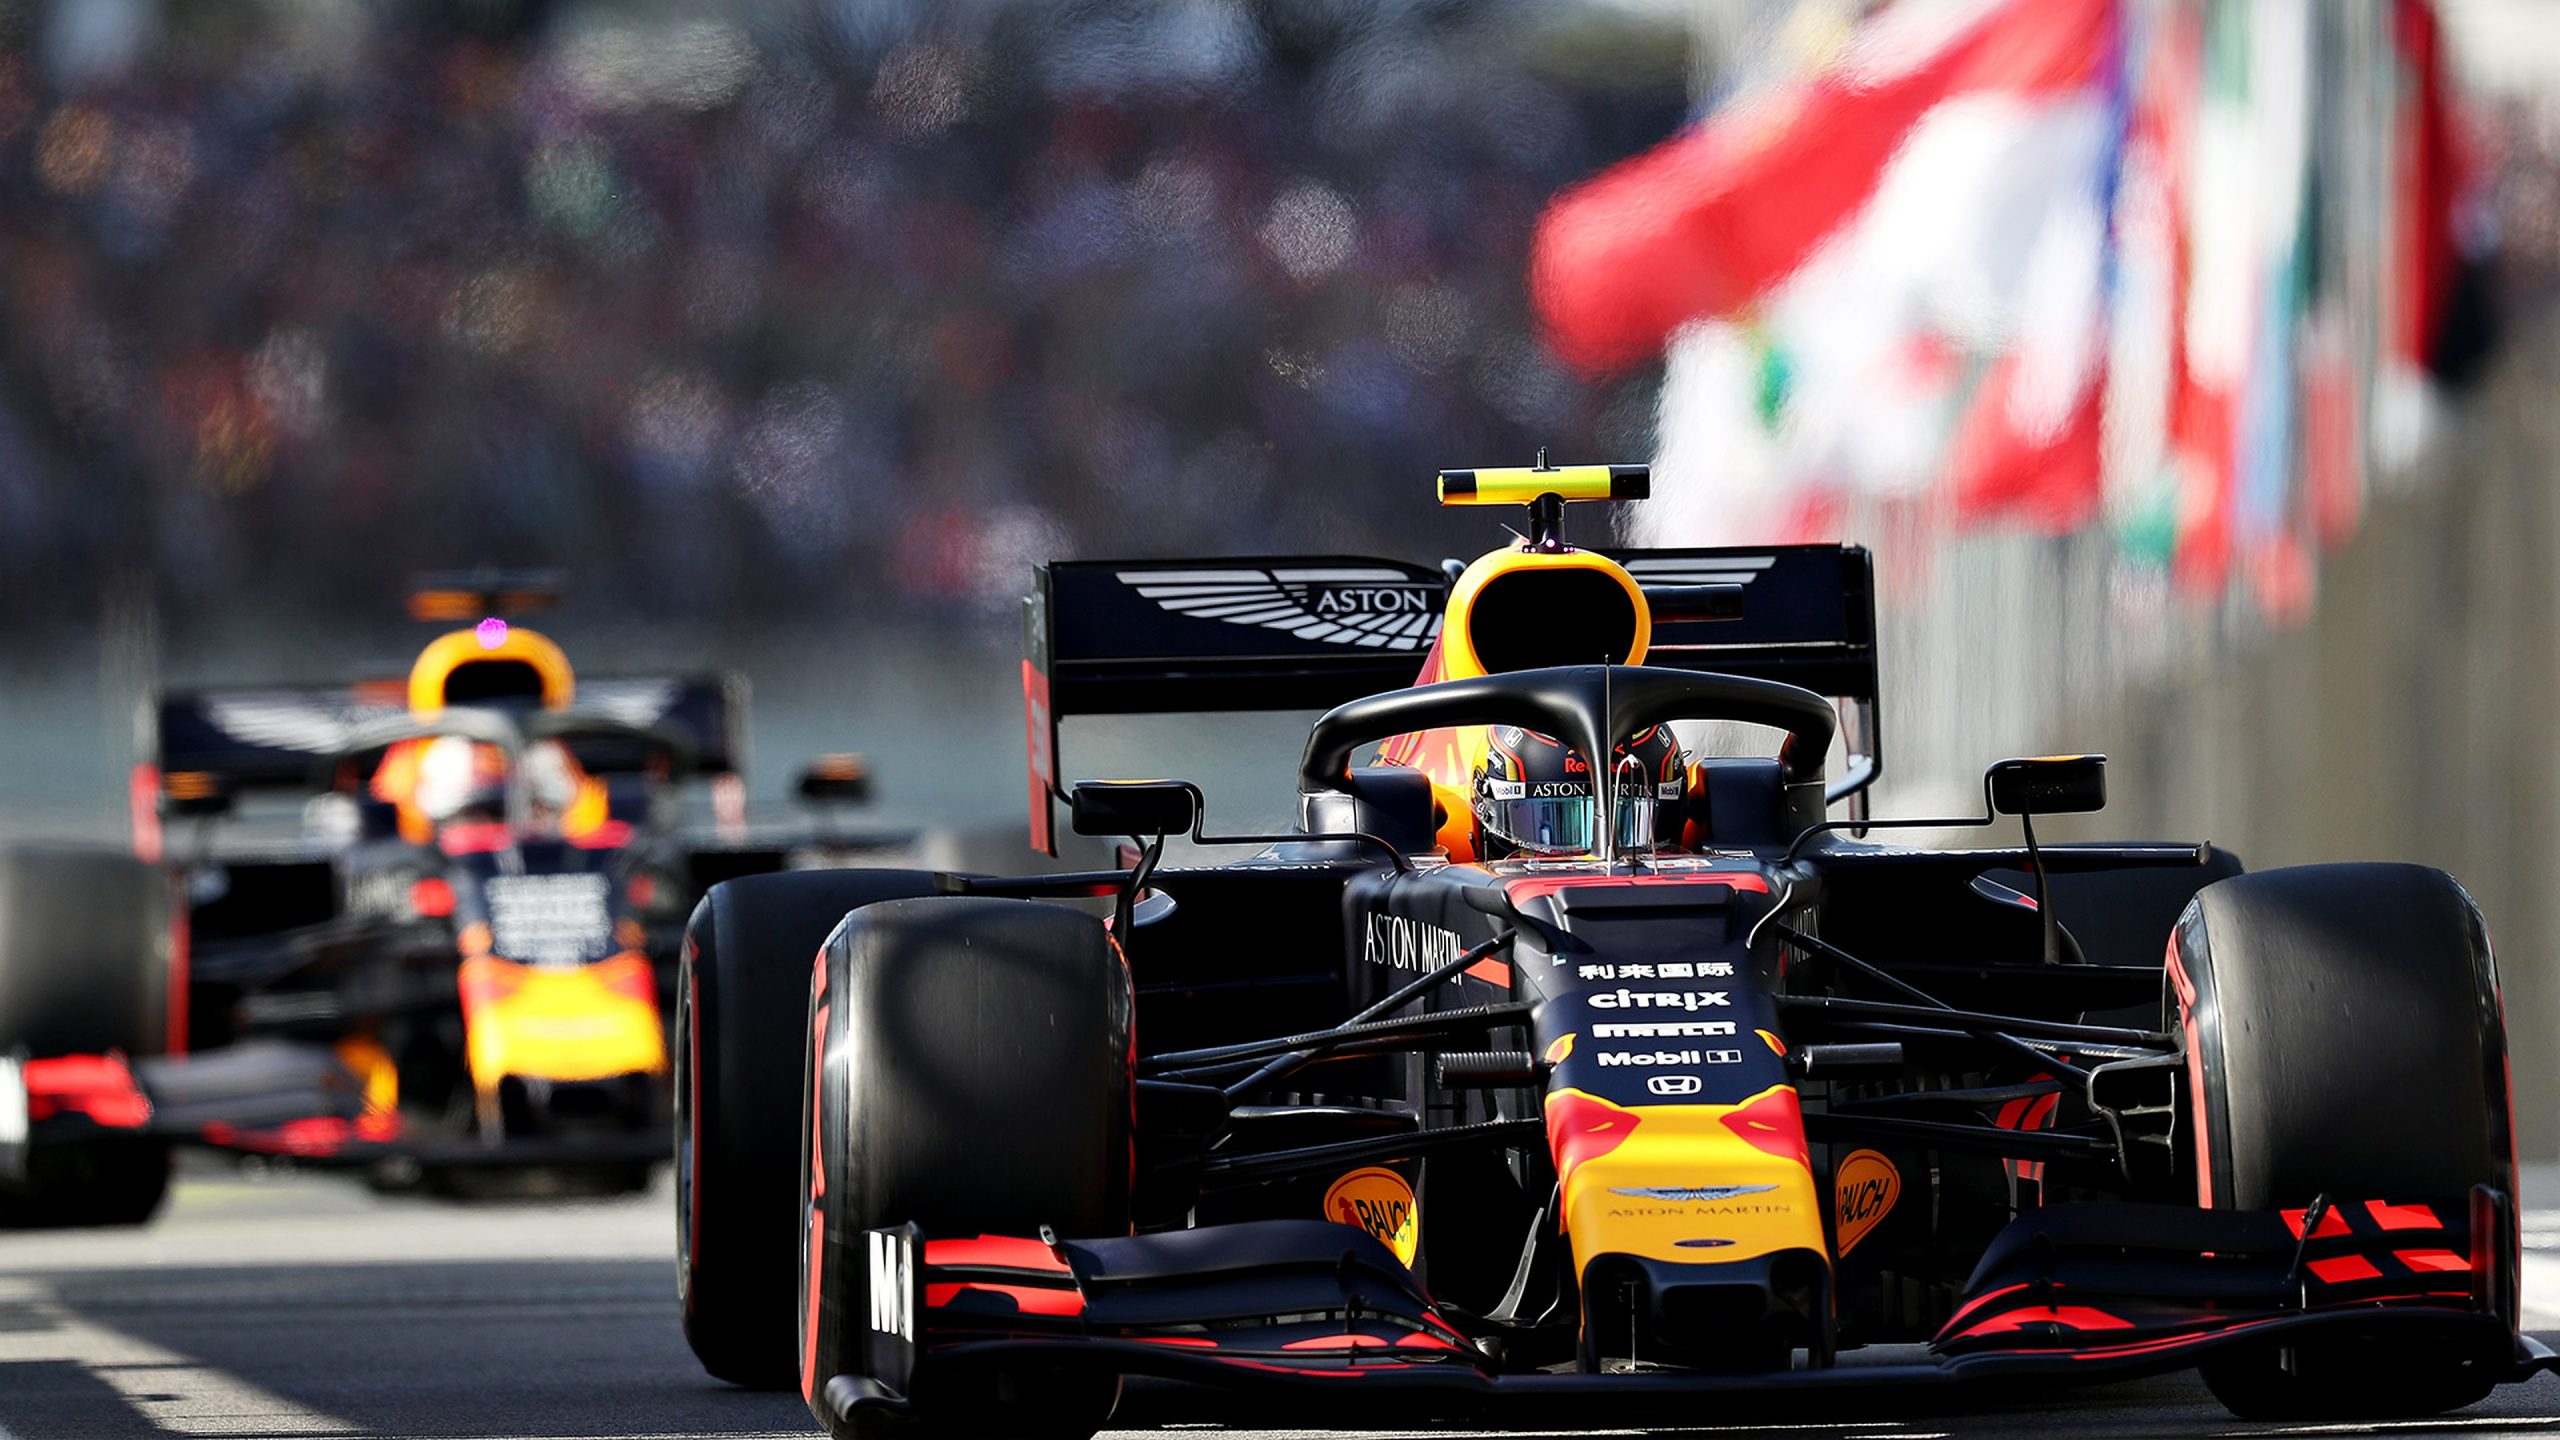 Red Bull Spent £237mn On Its 2019 F1 Campaign